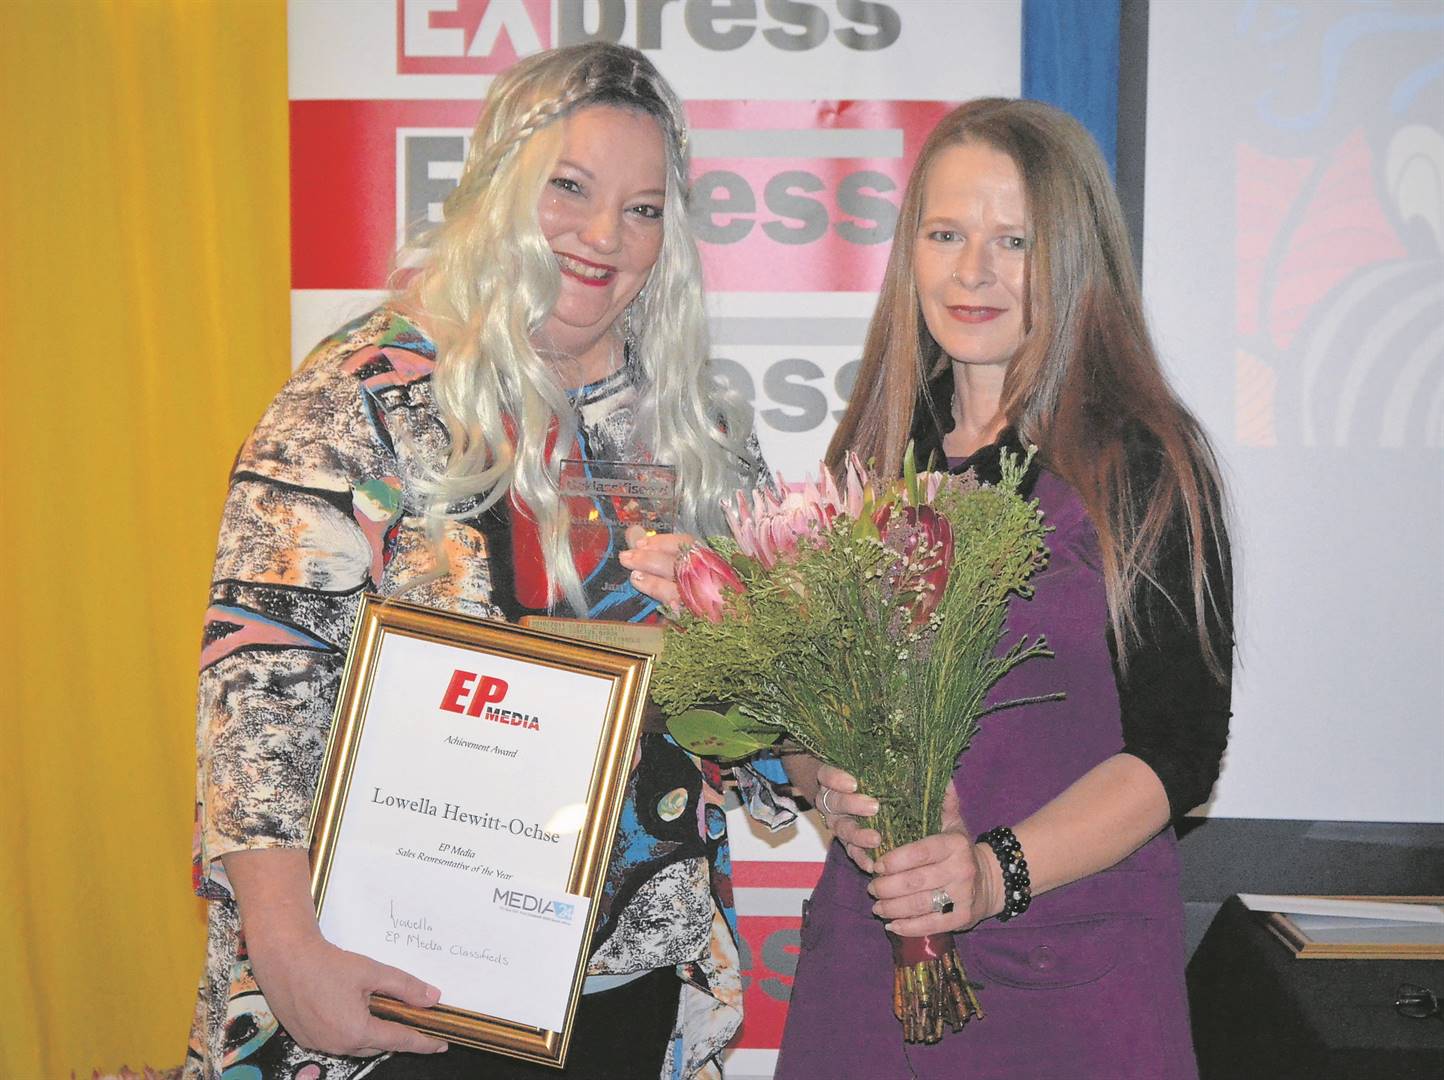 : Lowella Hewitt-Ochse (right) received two awards. The first was for ‘EP Media’ Classifieds Representative of the Year as well as for New Business Rep of the year.photos: heilie combrinck